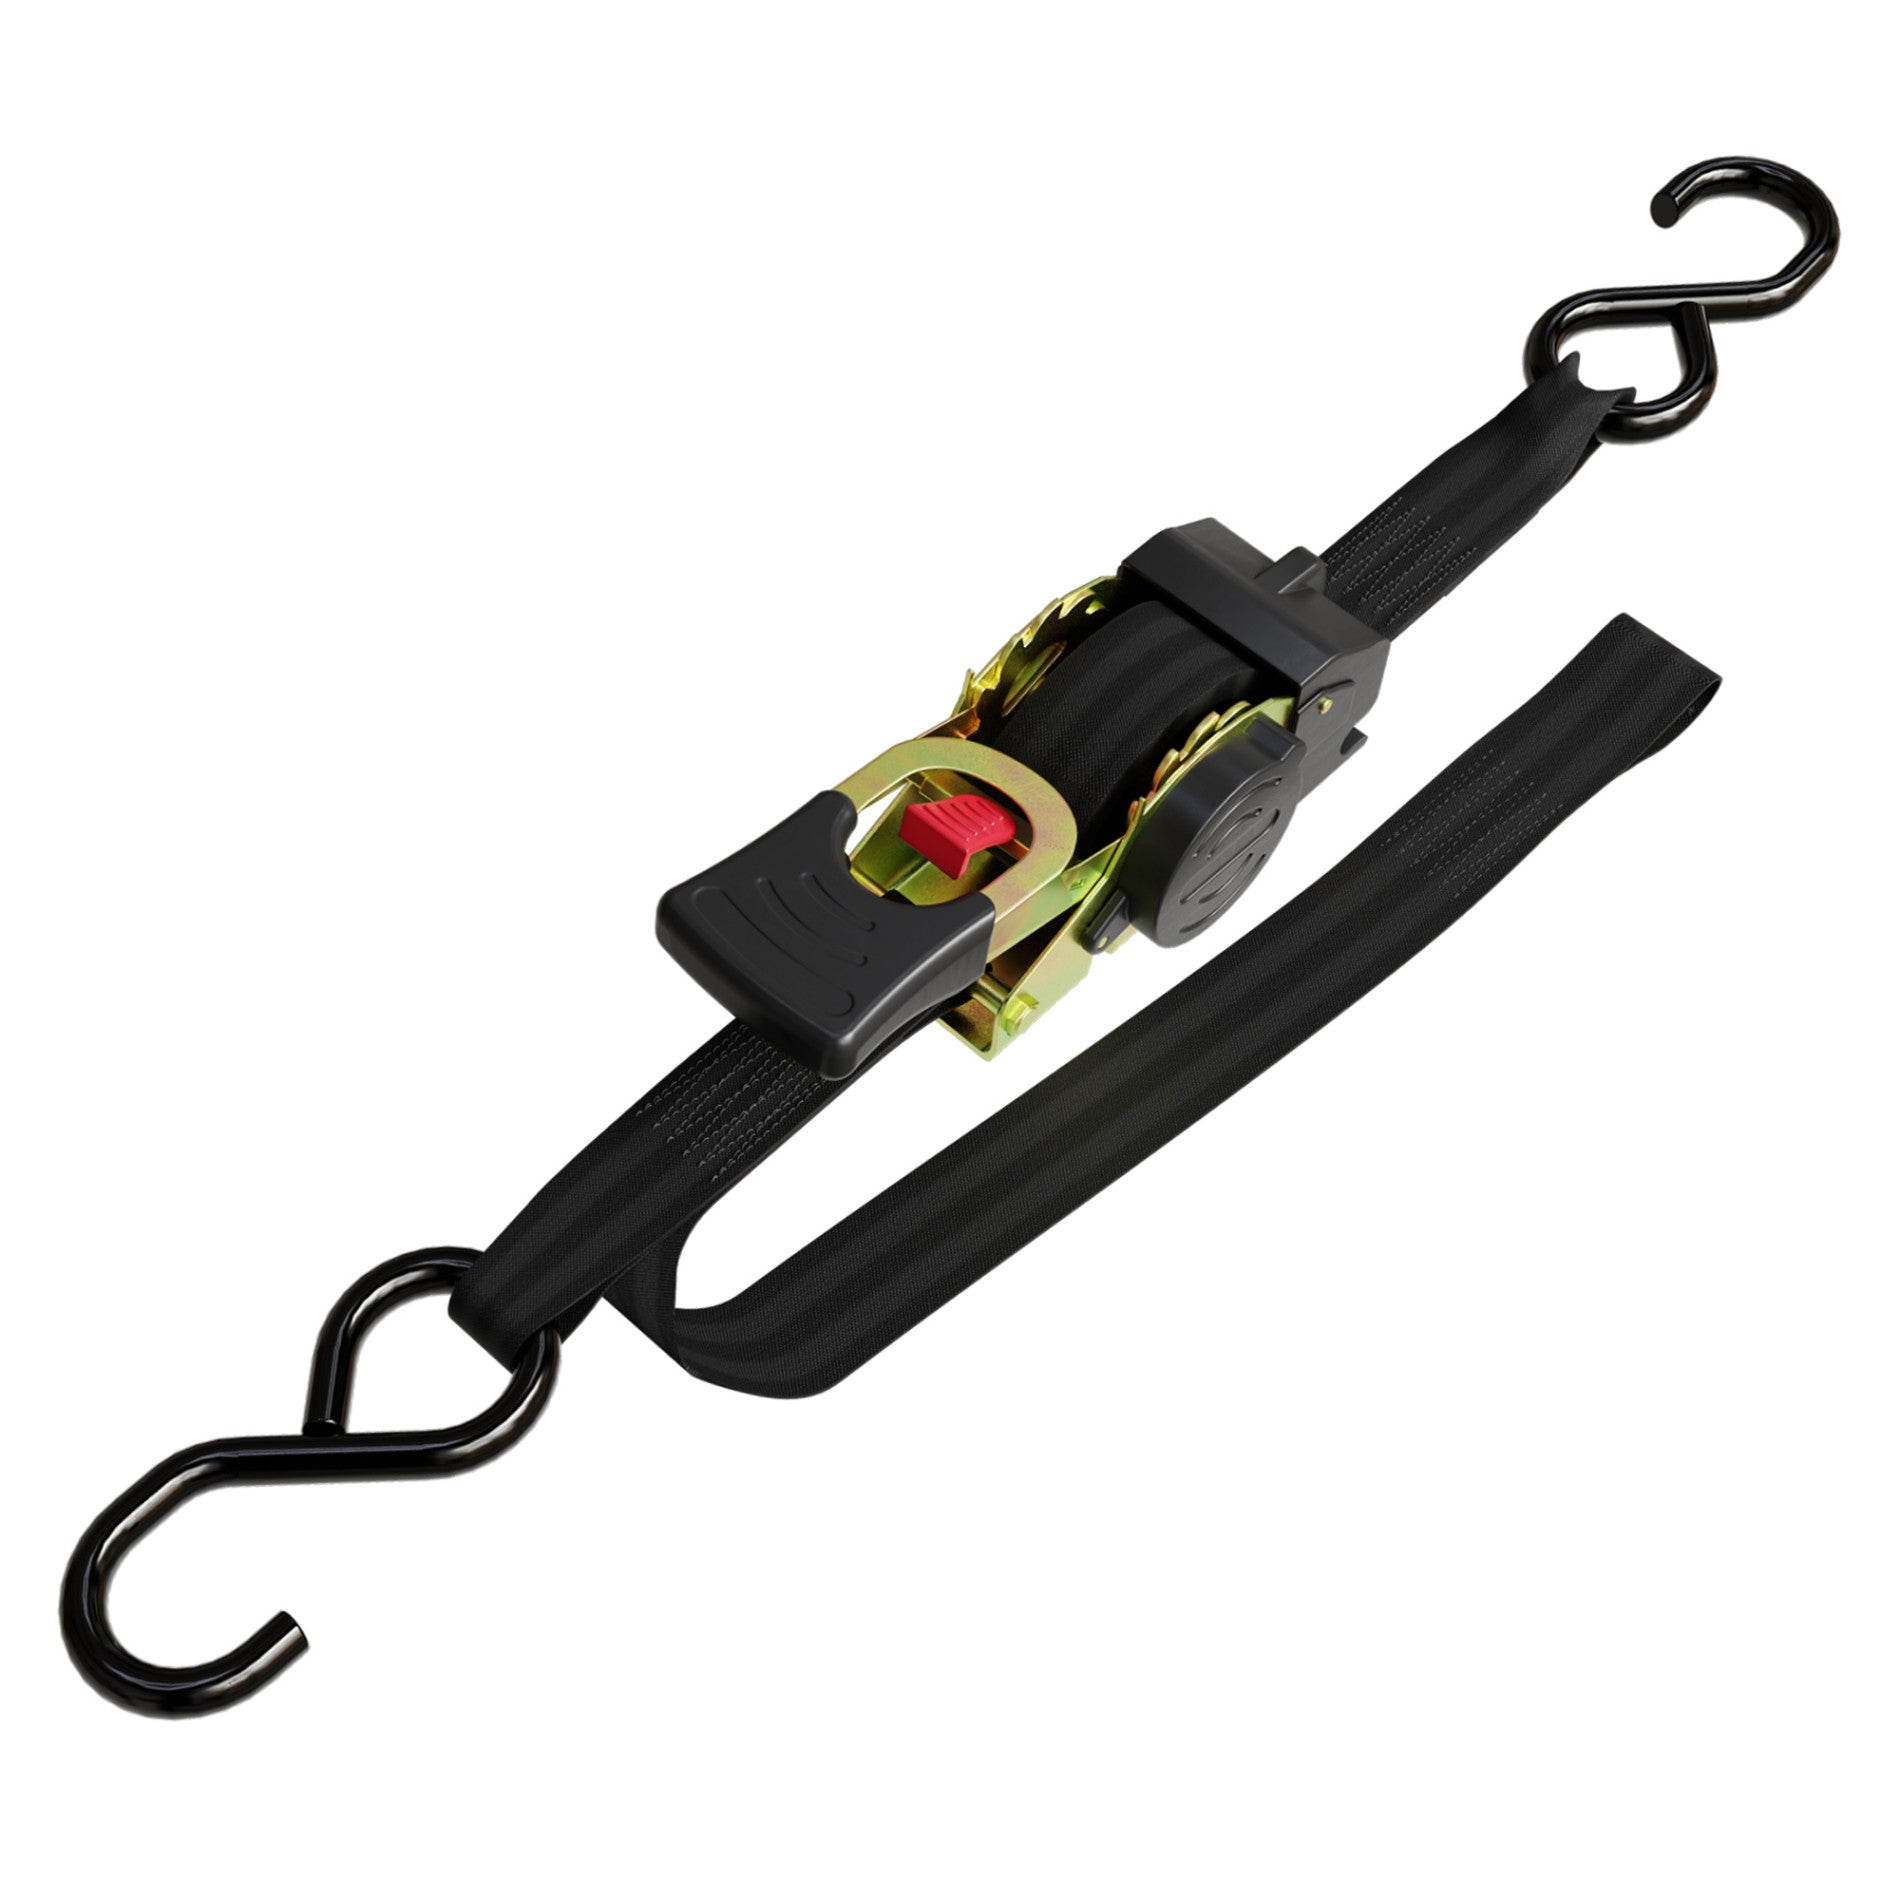 1 x 6' Motorcycle Ratchet Tie-Down Strap with Integrated Soft Loop, Flat Snap  Hook - Black